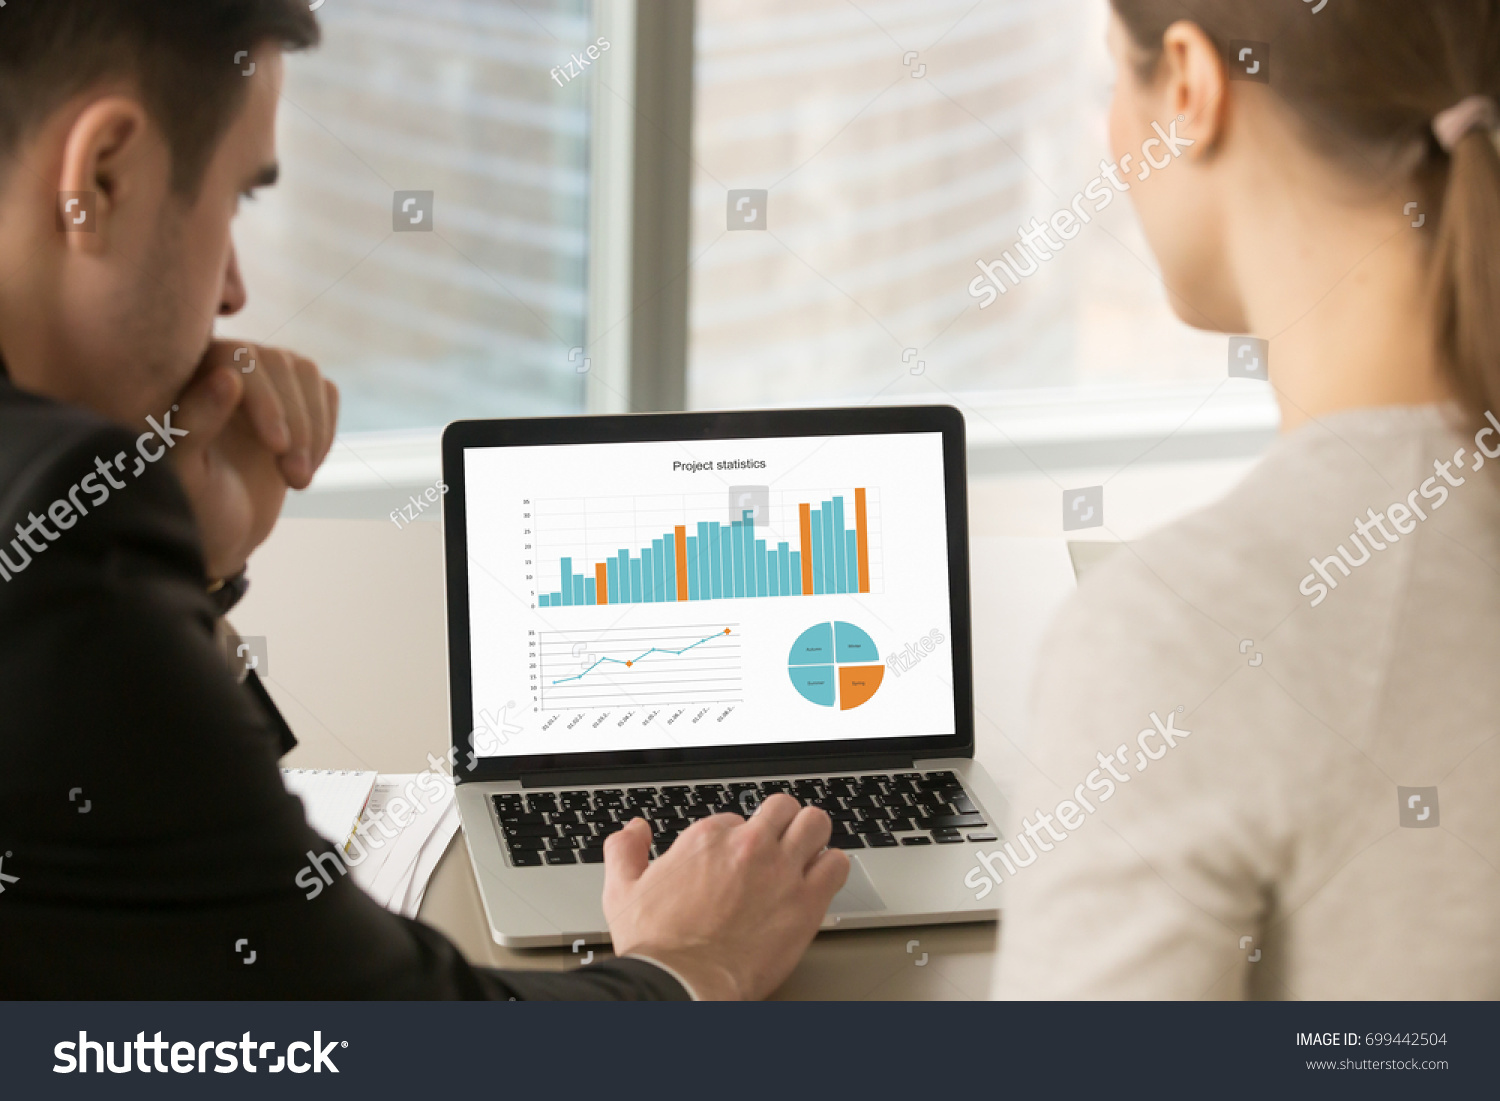 Businessman and businesswoman analyzing project statistics data on laptop screen, partners discussing infographic information about company growth, annual report analysis, close up rear view #699442504